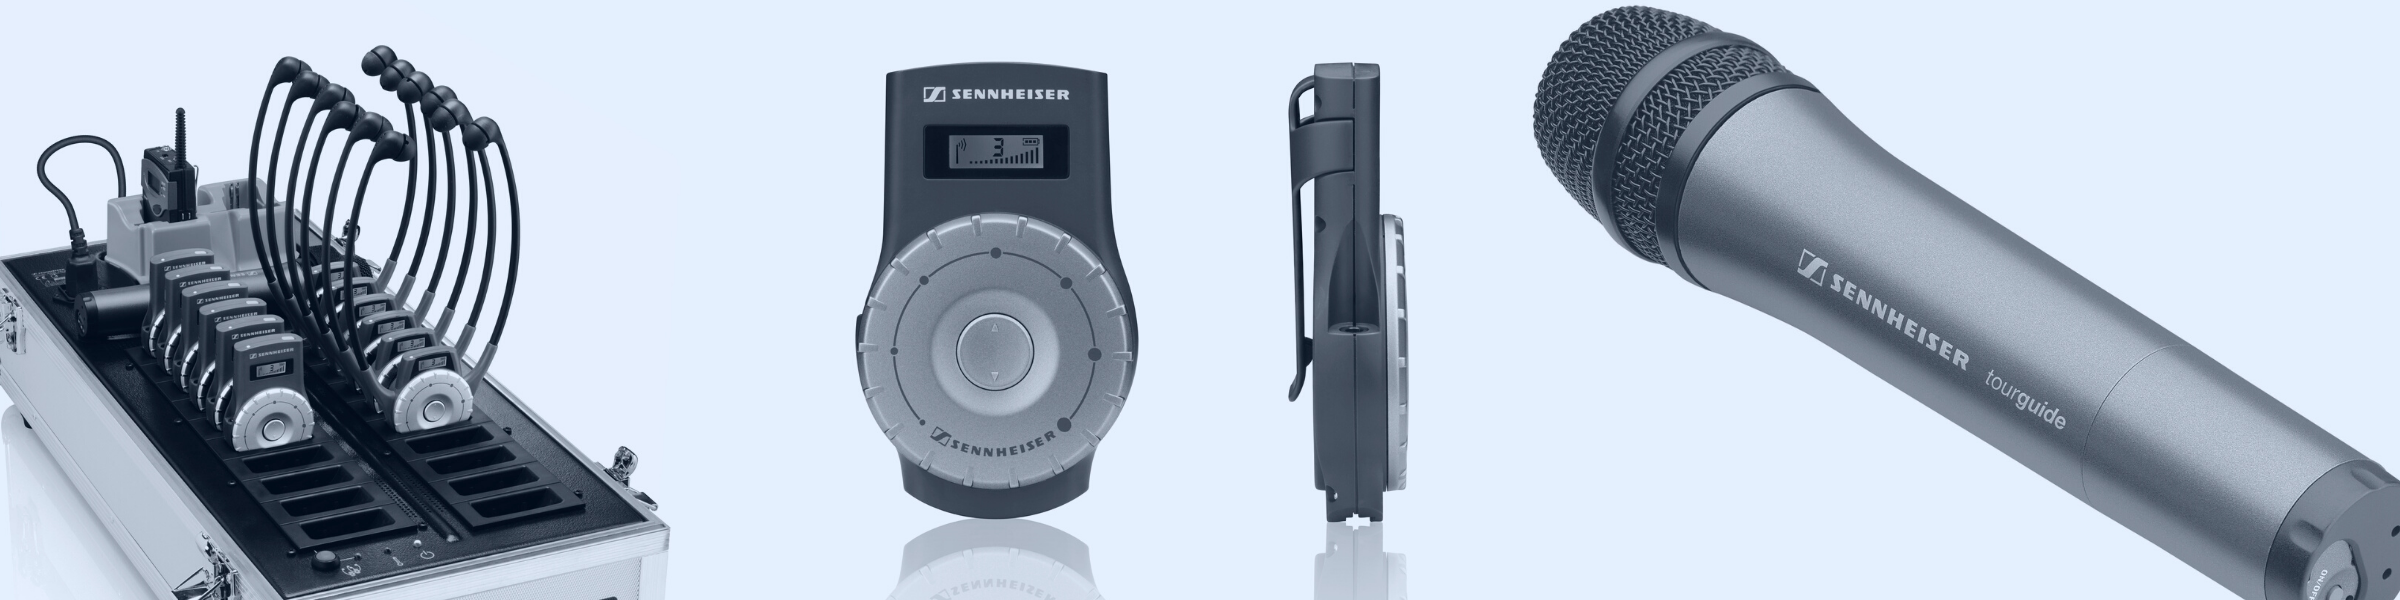 Buy Sennheiser Tour Guide Systems products 